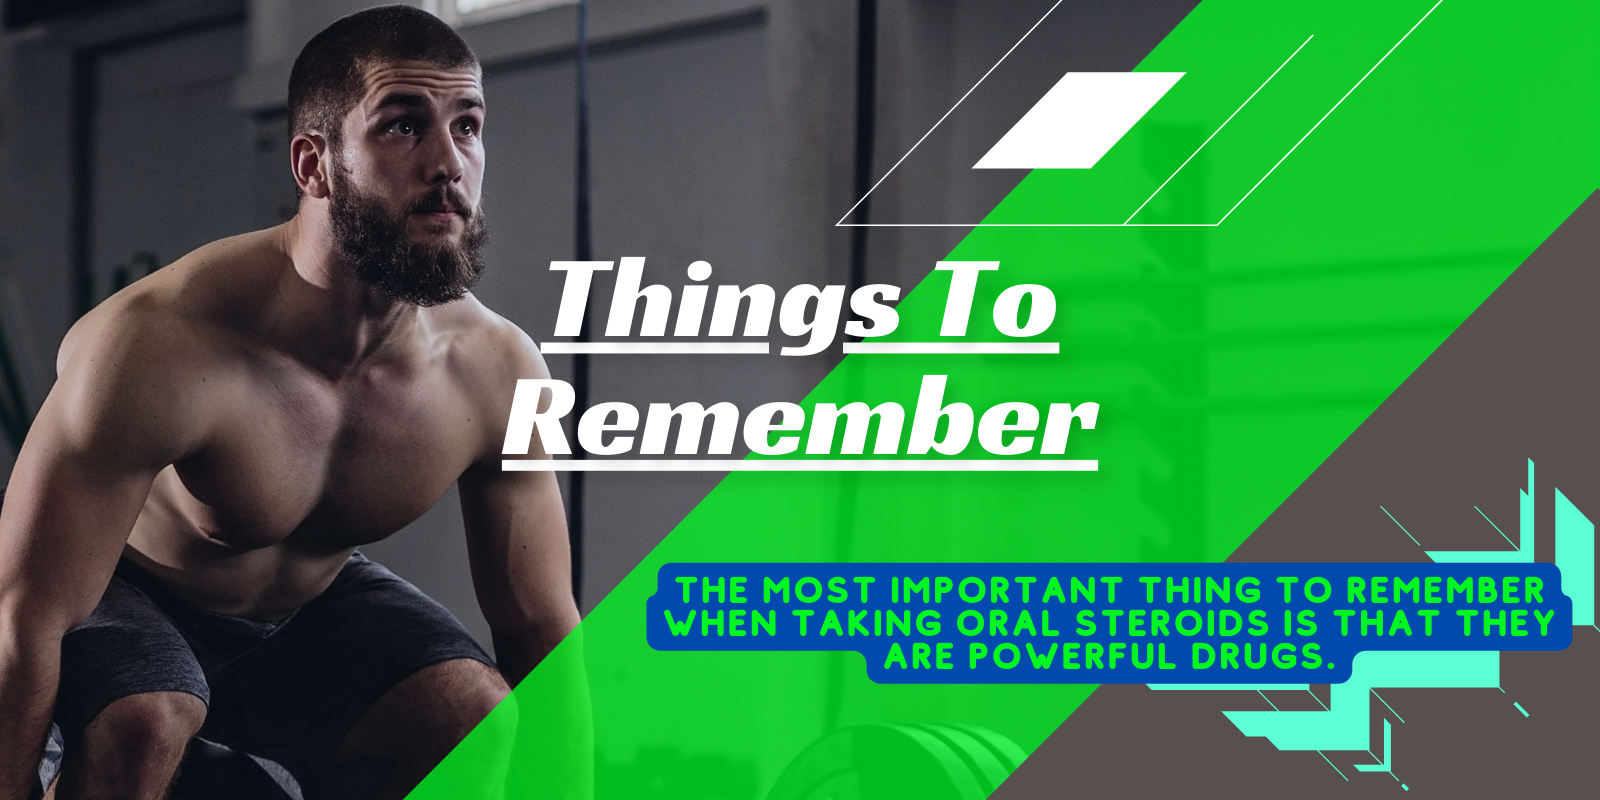 Things To Remember when in steroids